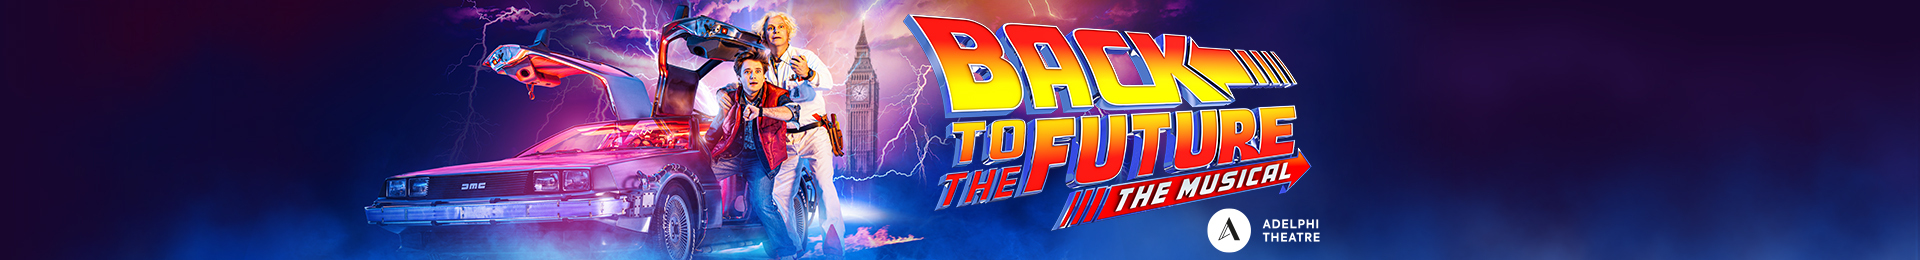 Back to the Future banner image